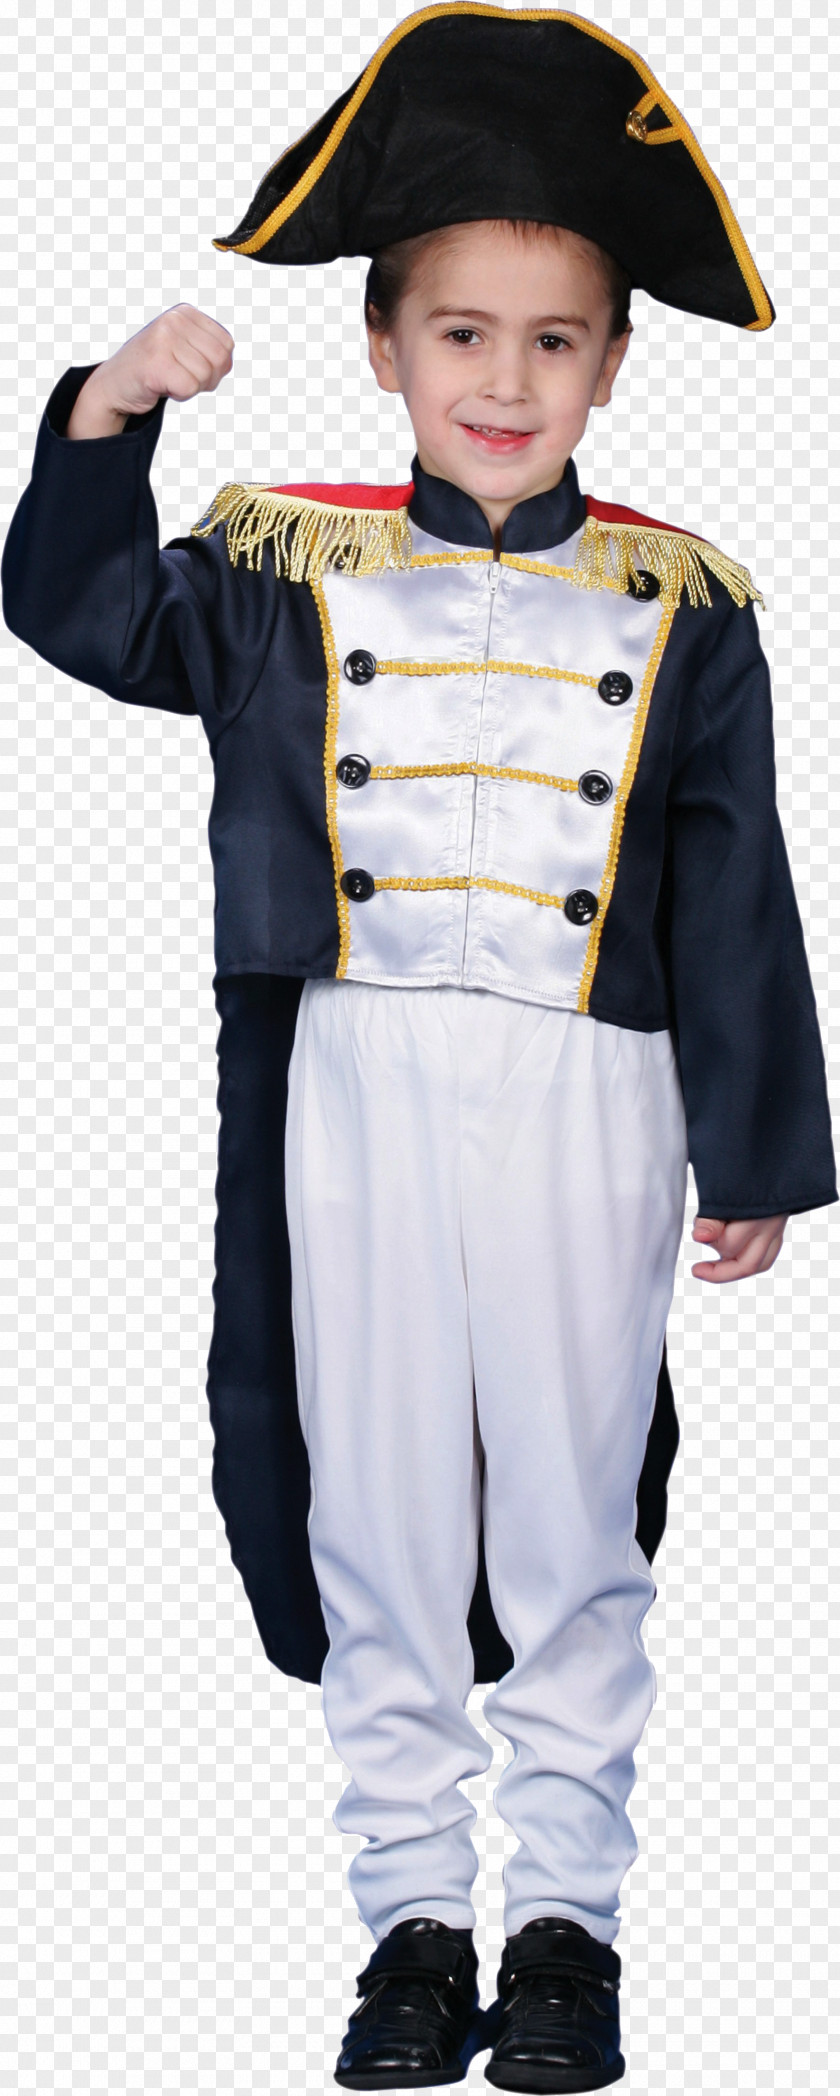 Dress Dress-up Costume Party Clothing PNG